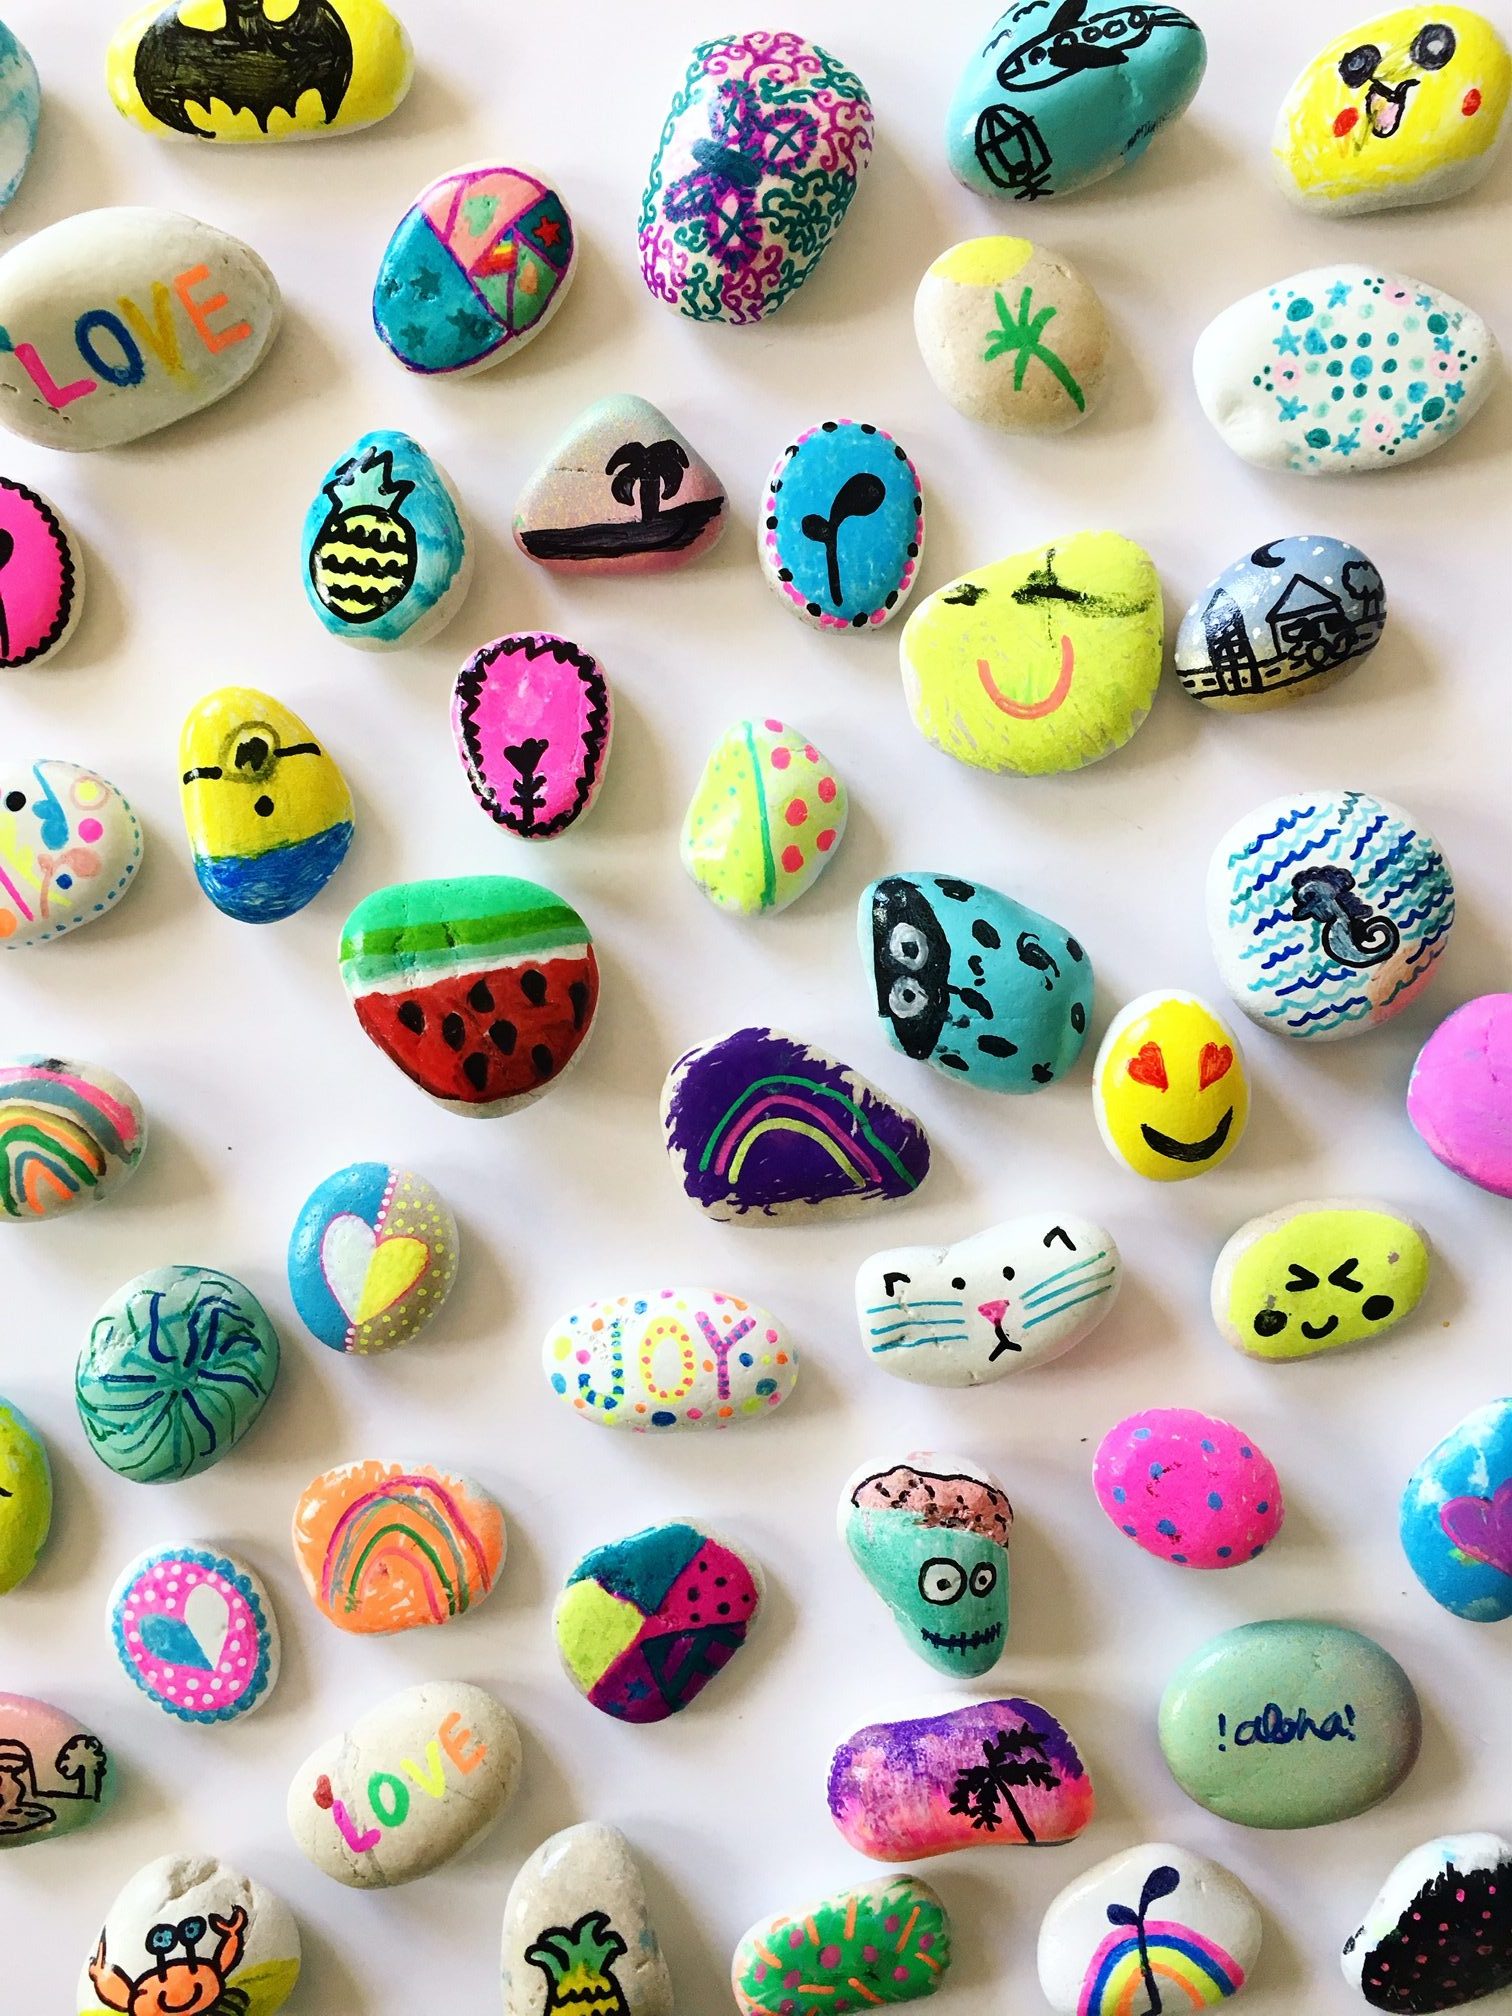 Creative Rock Painting for Kids - Projects with Kids